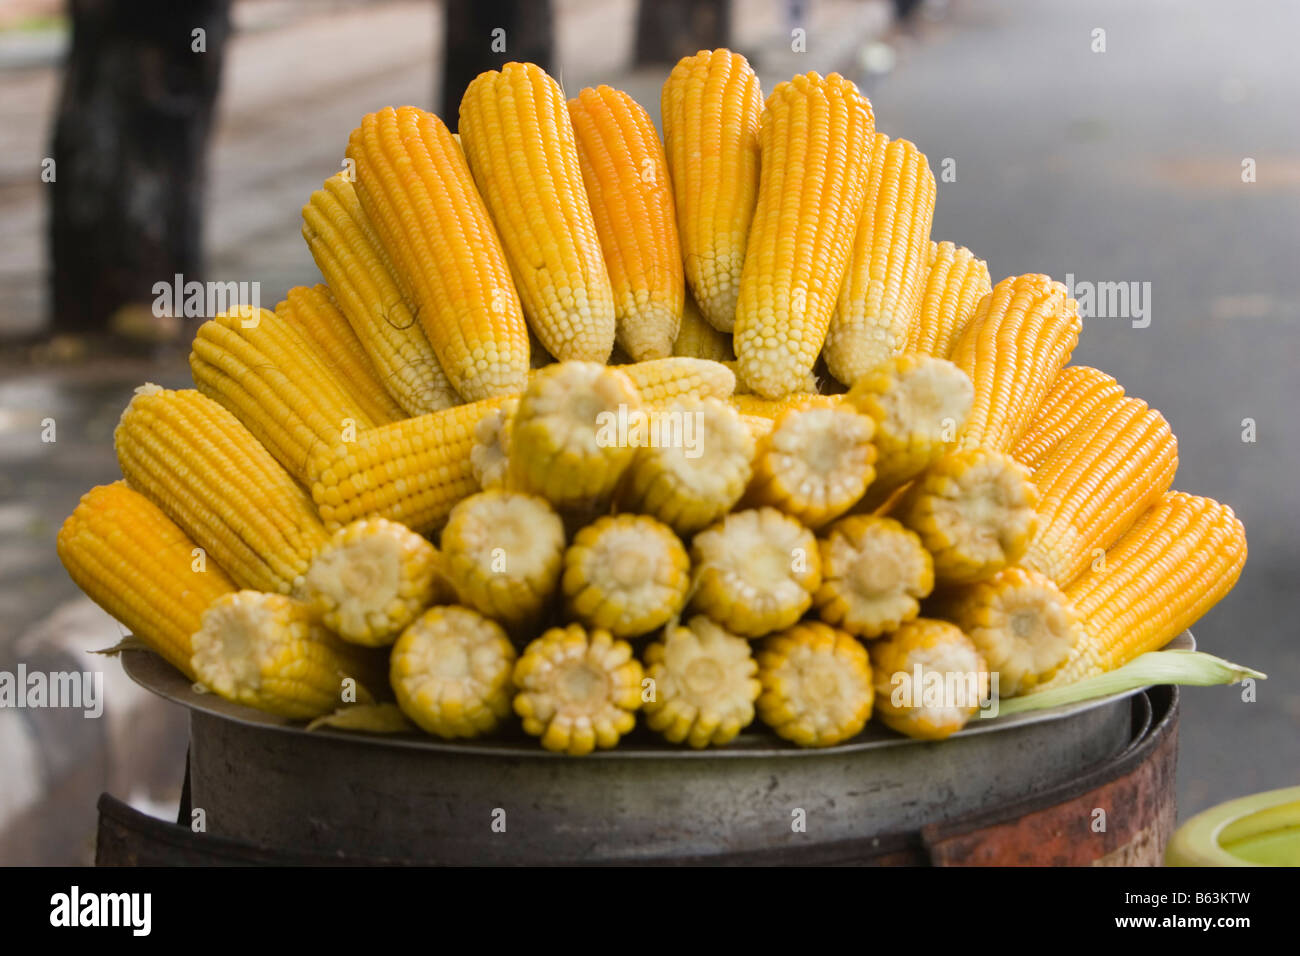 Steamed fresh sweet corn for sale in Chennai, India. Stock Photo